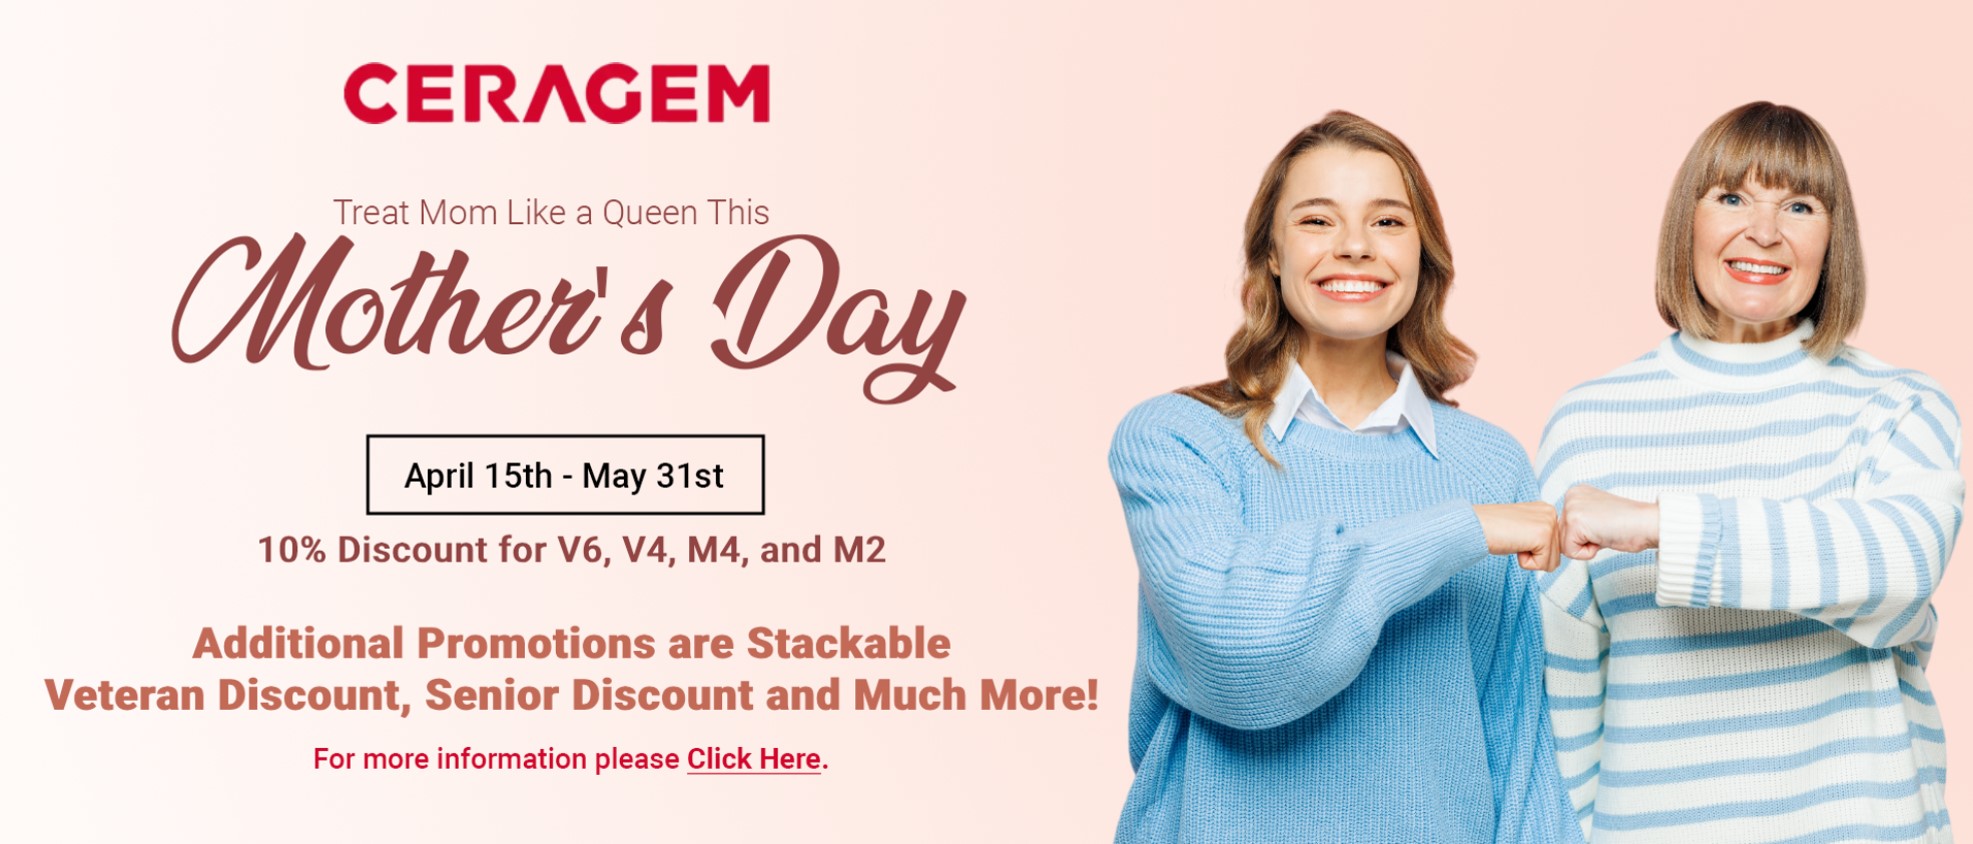 Mother',s day Promotion.jpg